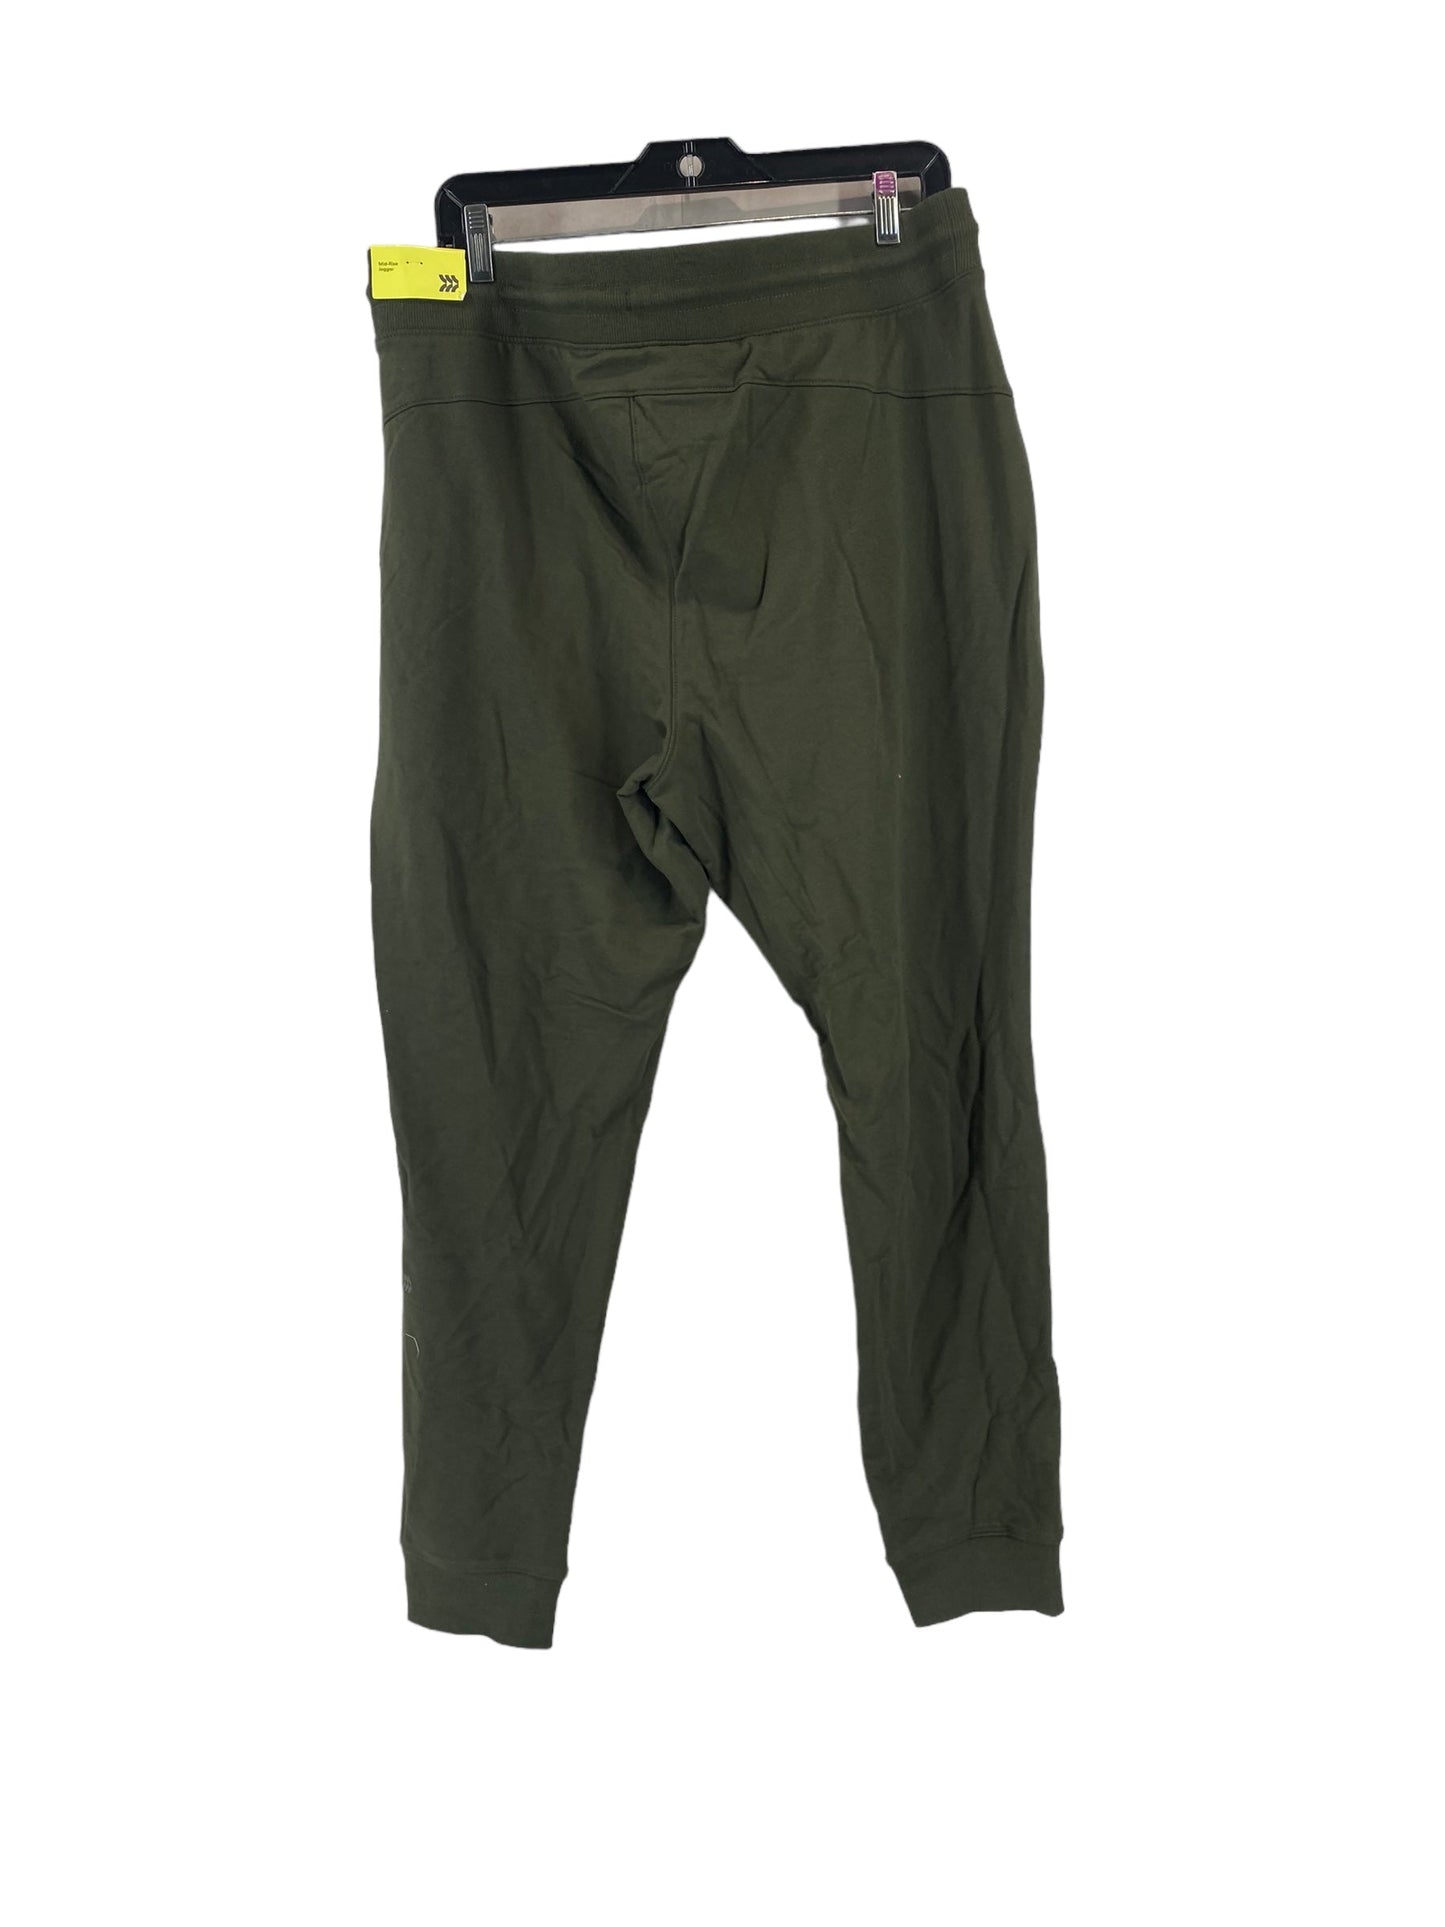 Athletic Pants By All In Motion  Size: 2x